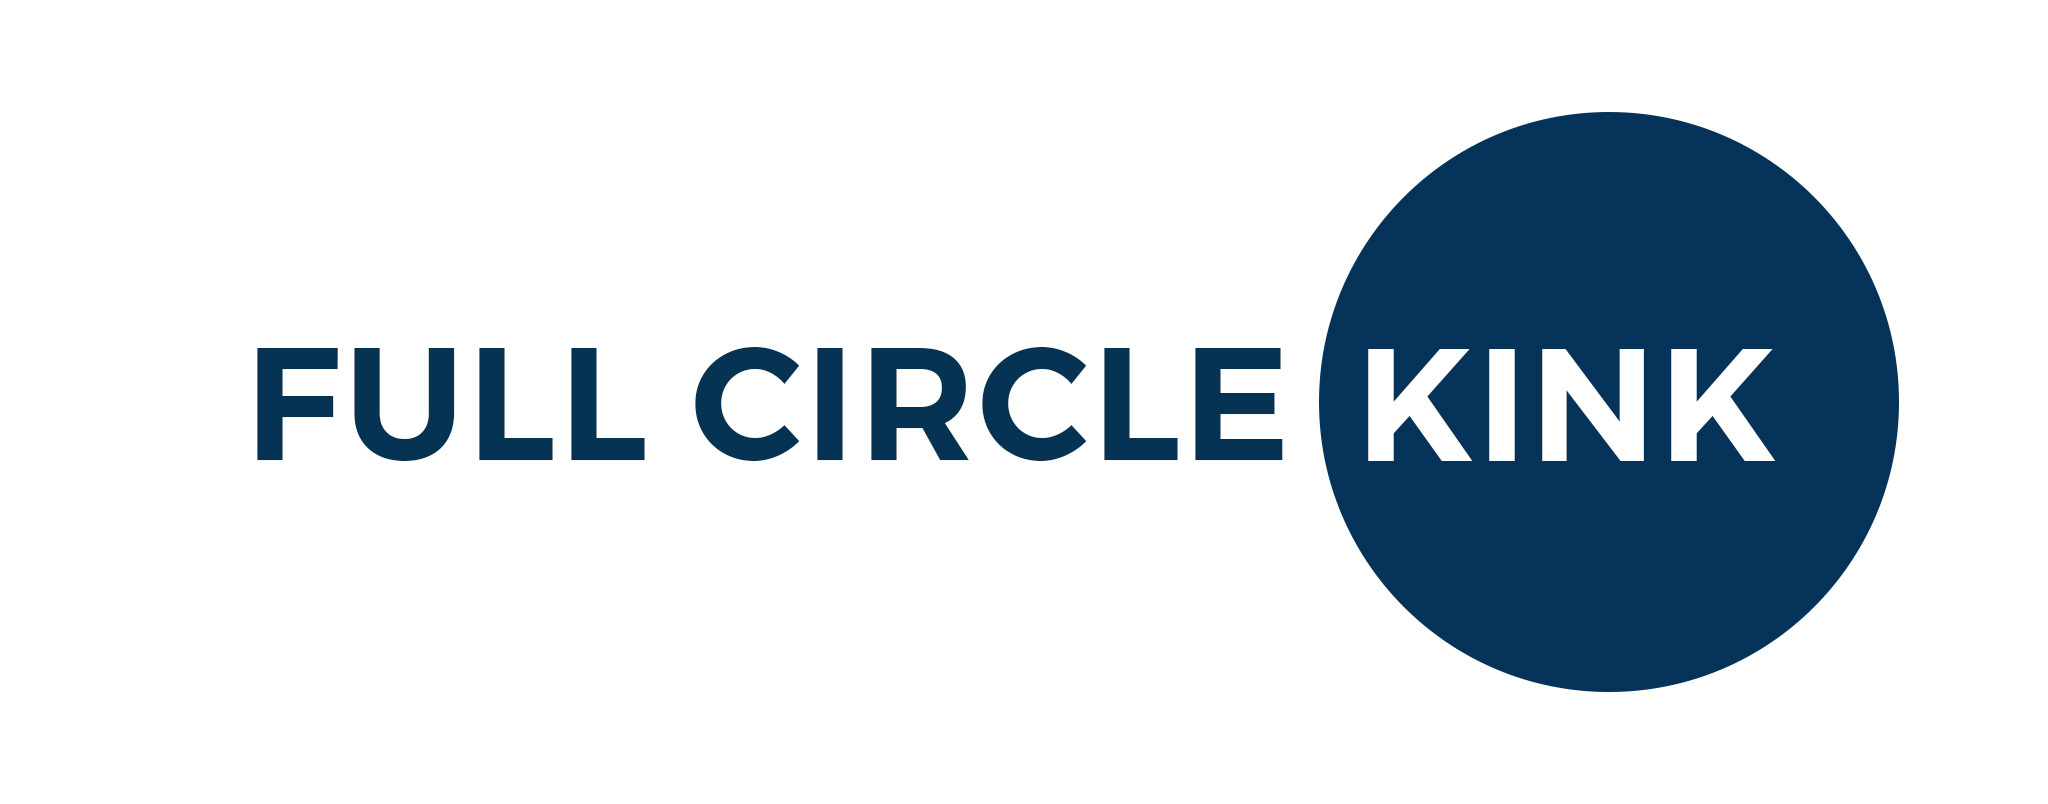 The words FULL CIRCLE in blue on a white background followed by the word KINK in white inside a blue circle.